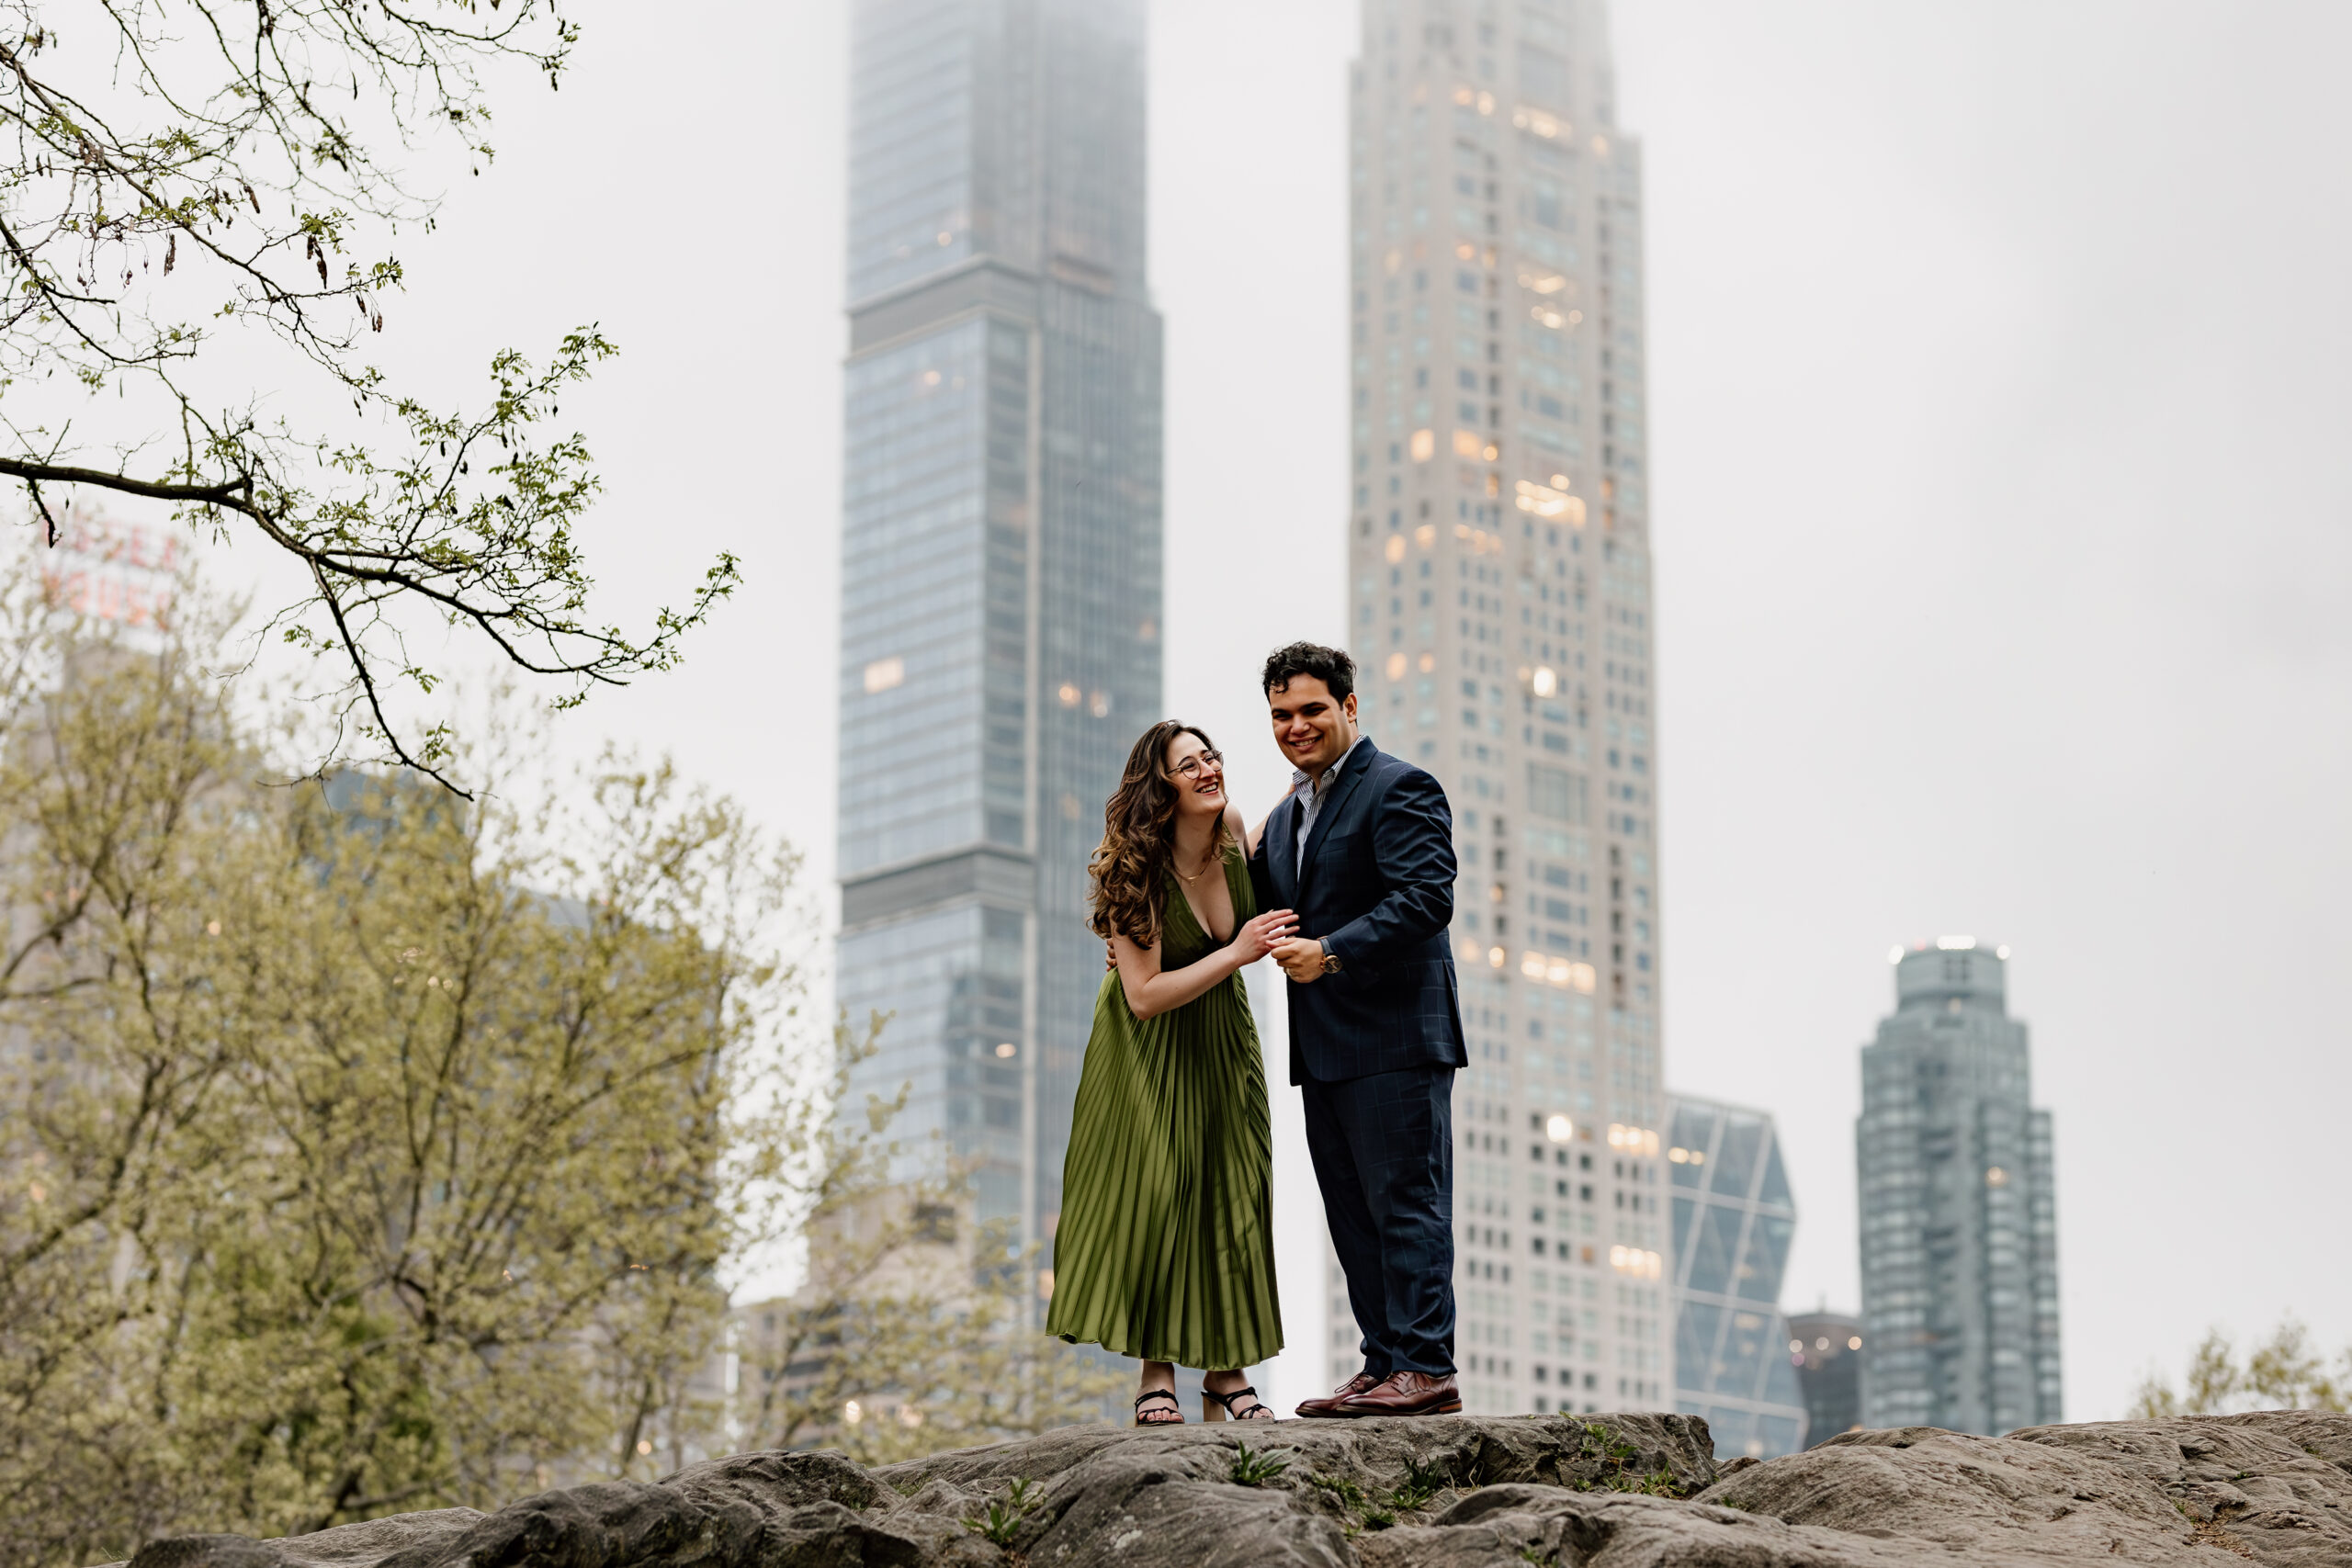 engaged couple smiling and laughing on top of boulders in central park, nyc with skyscrapers in the background